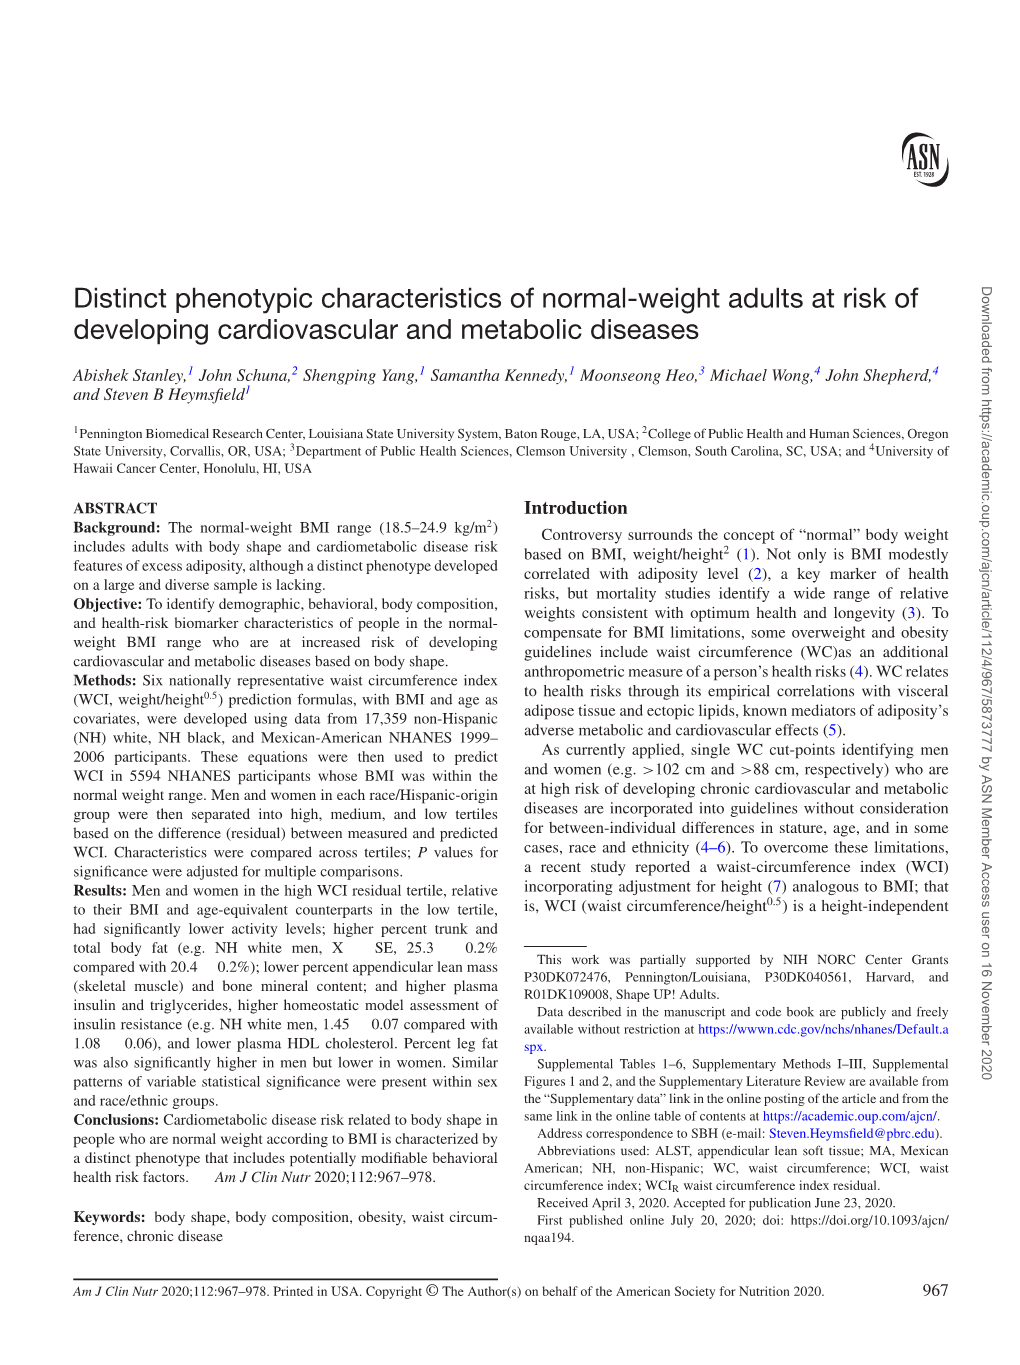 Distinct Phenotypic Characteristics of Normal-Weight Adults at Risk Of